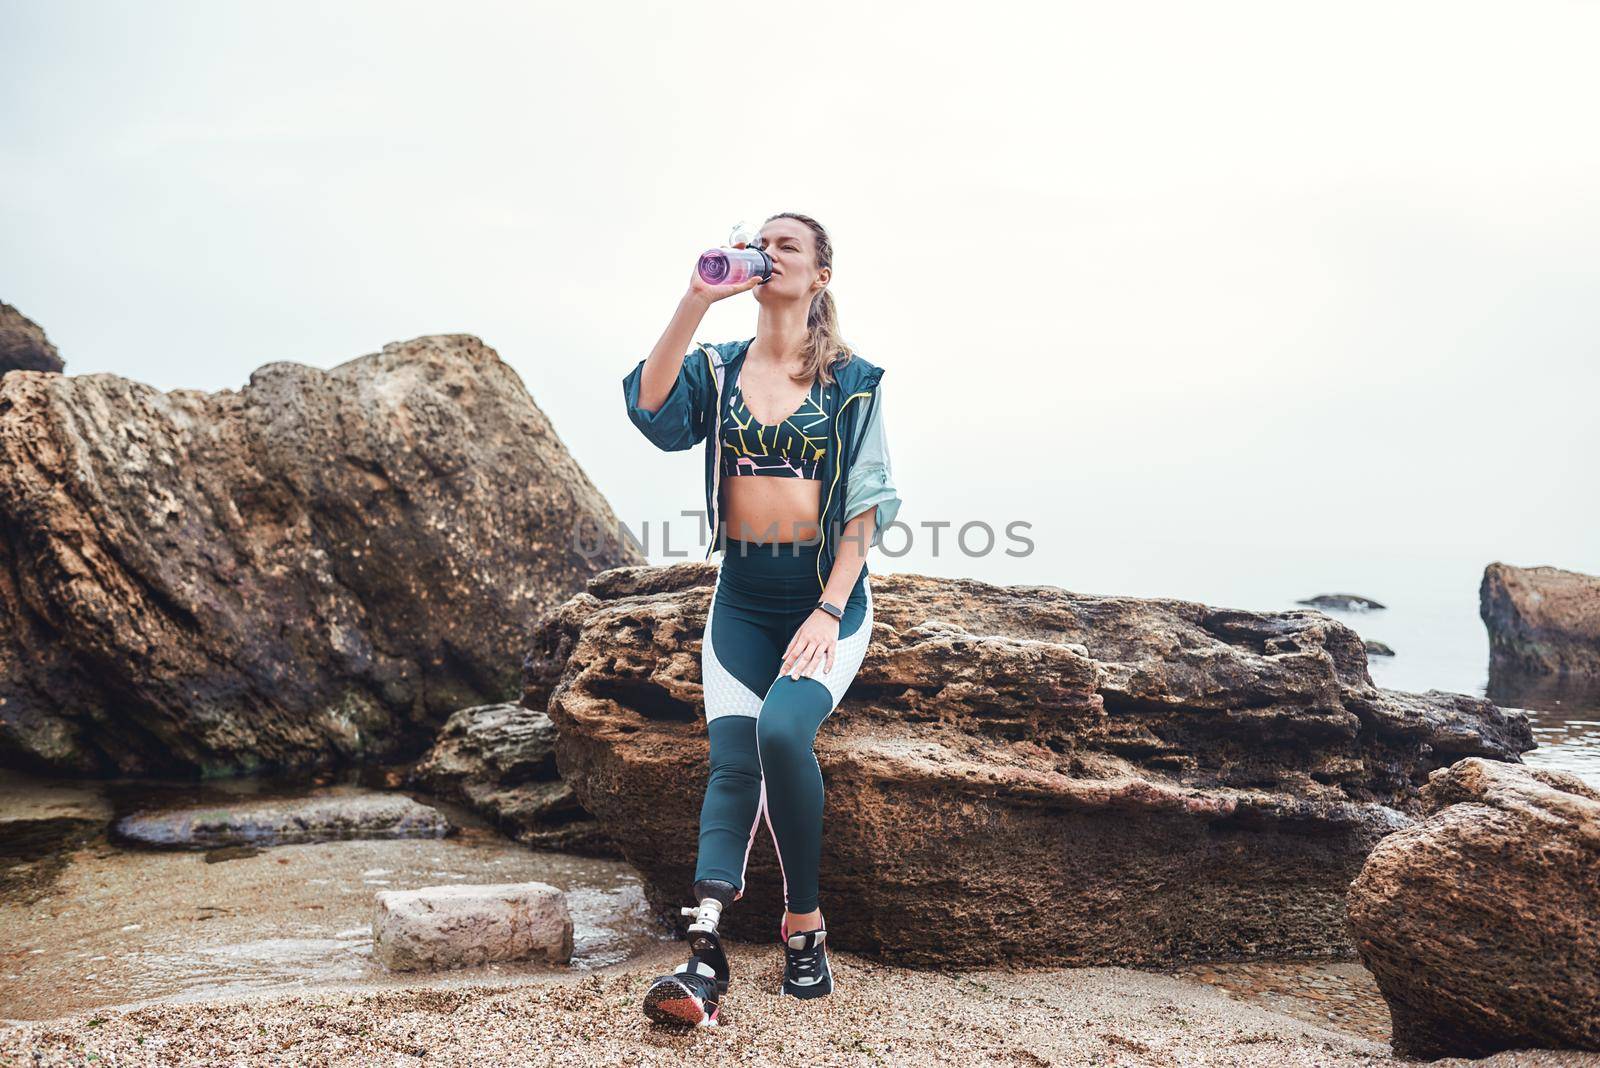 Taking a break. Tired disabled athlete woman with prosthetic leg drinking water while sitting on the stone at the beach by friendsstock